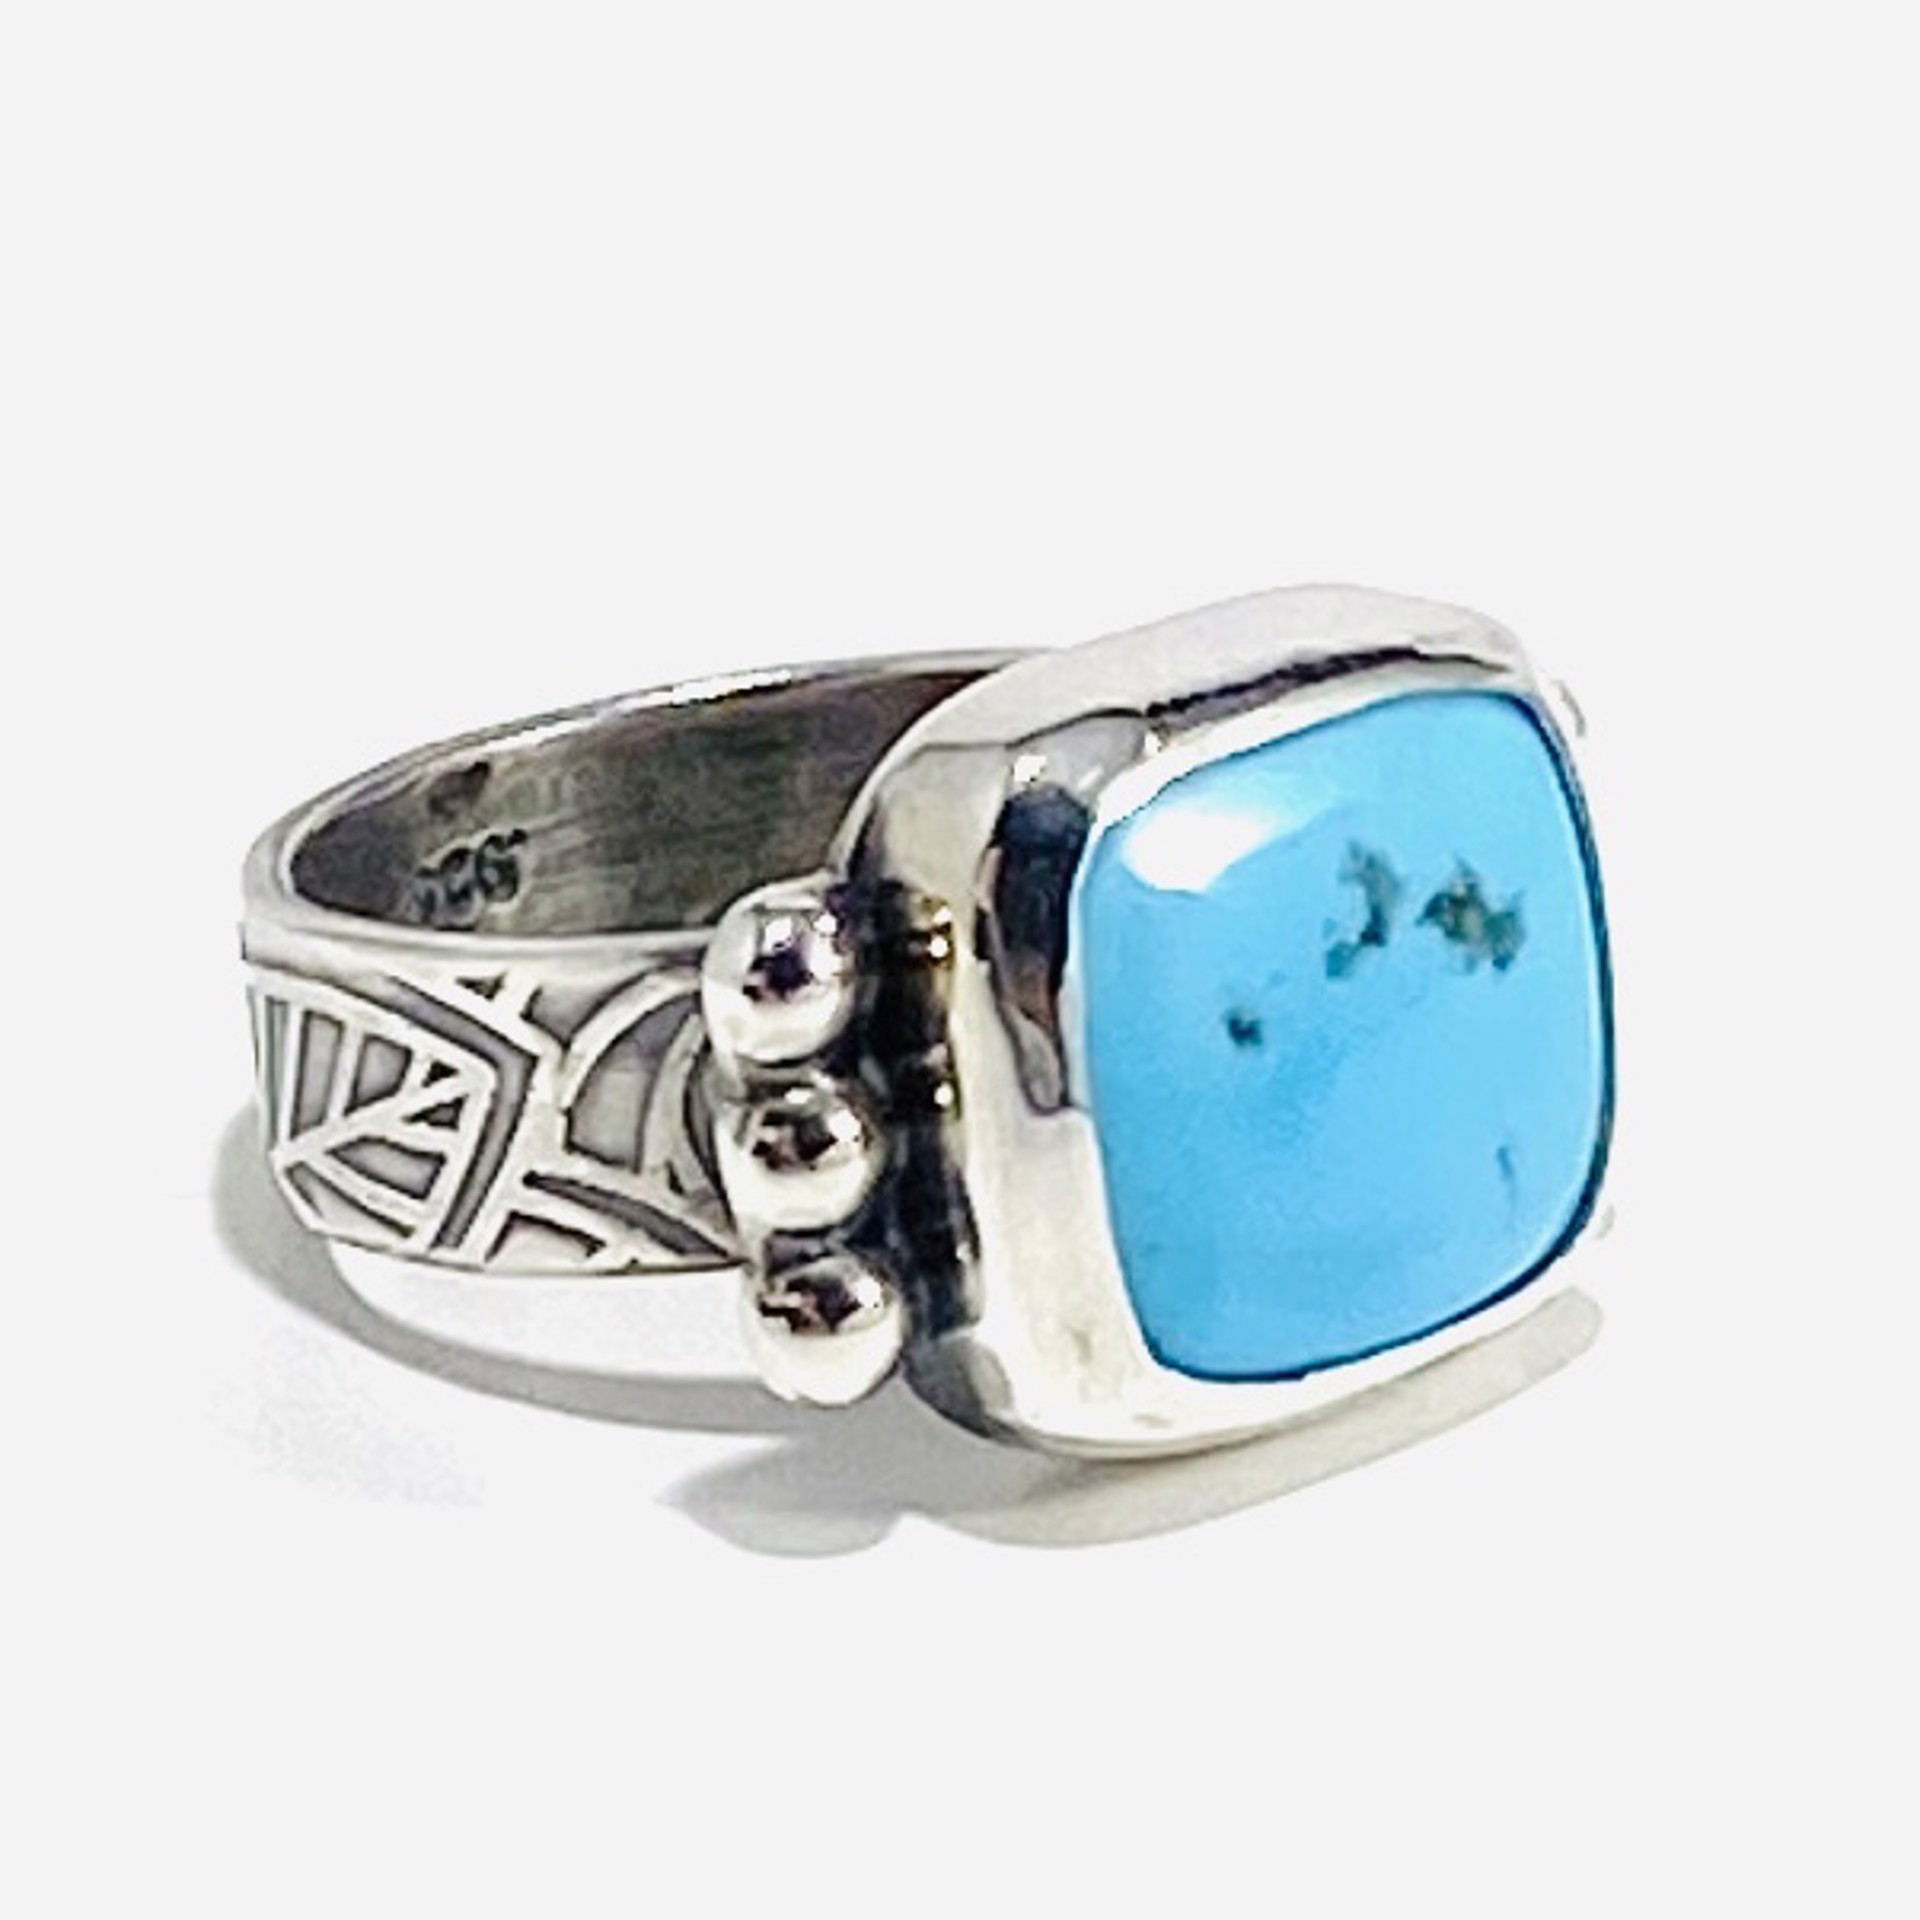 AB23-8 Square Campo Frio Turquoise Inlay Six Bead Accent Ring sz8.5 by Anne Bivens